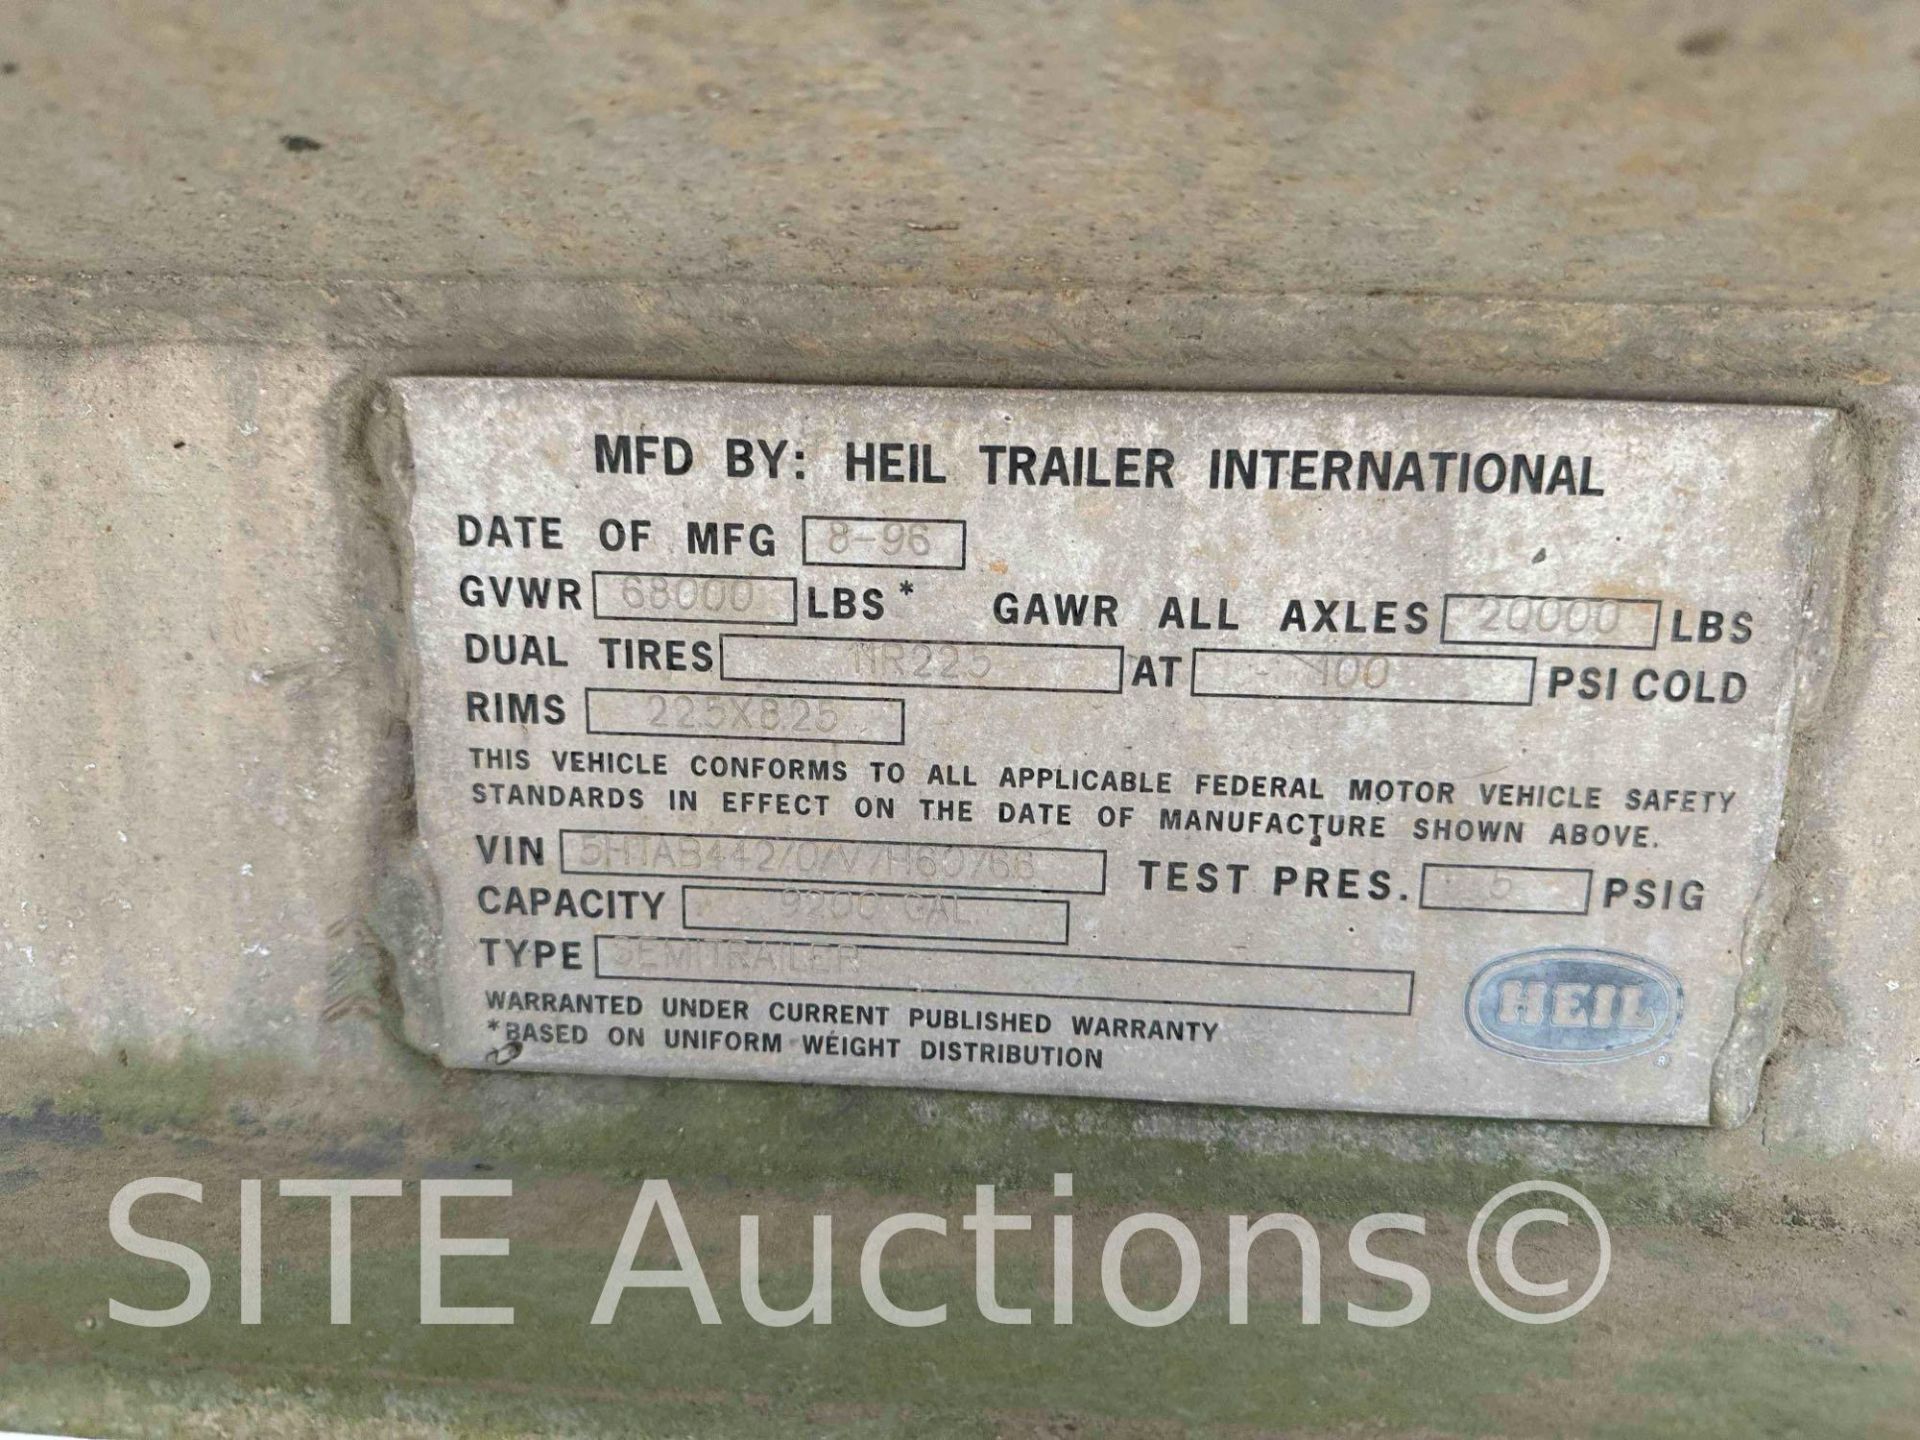 1996 Heil T/A Tank Trailer - Image 13 of 16